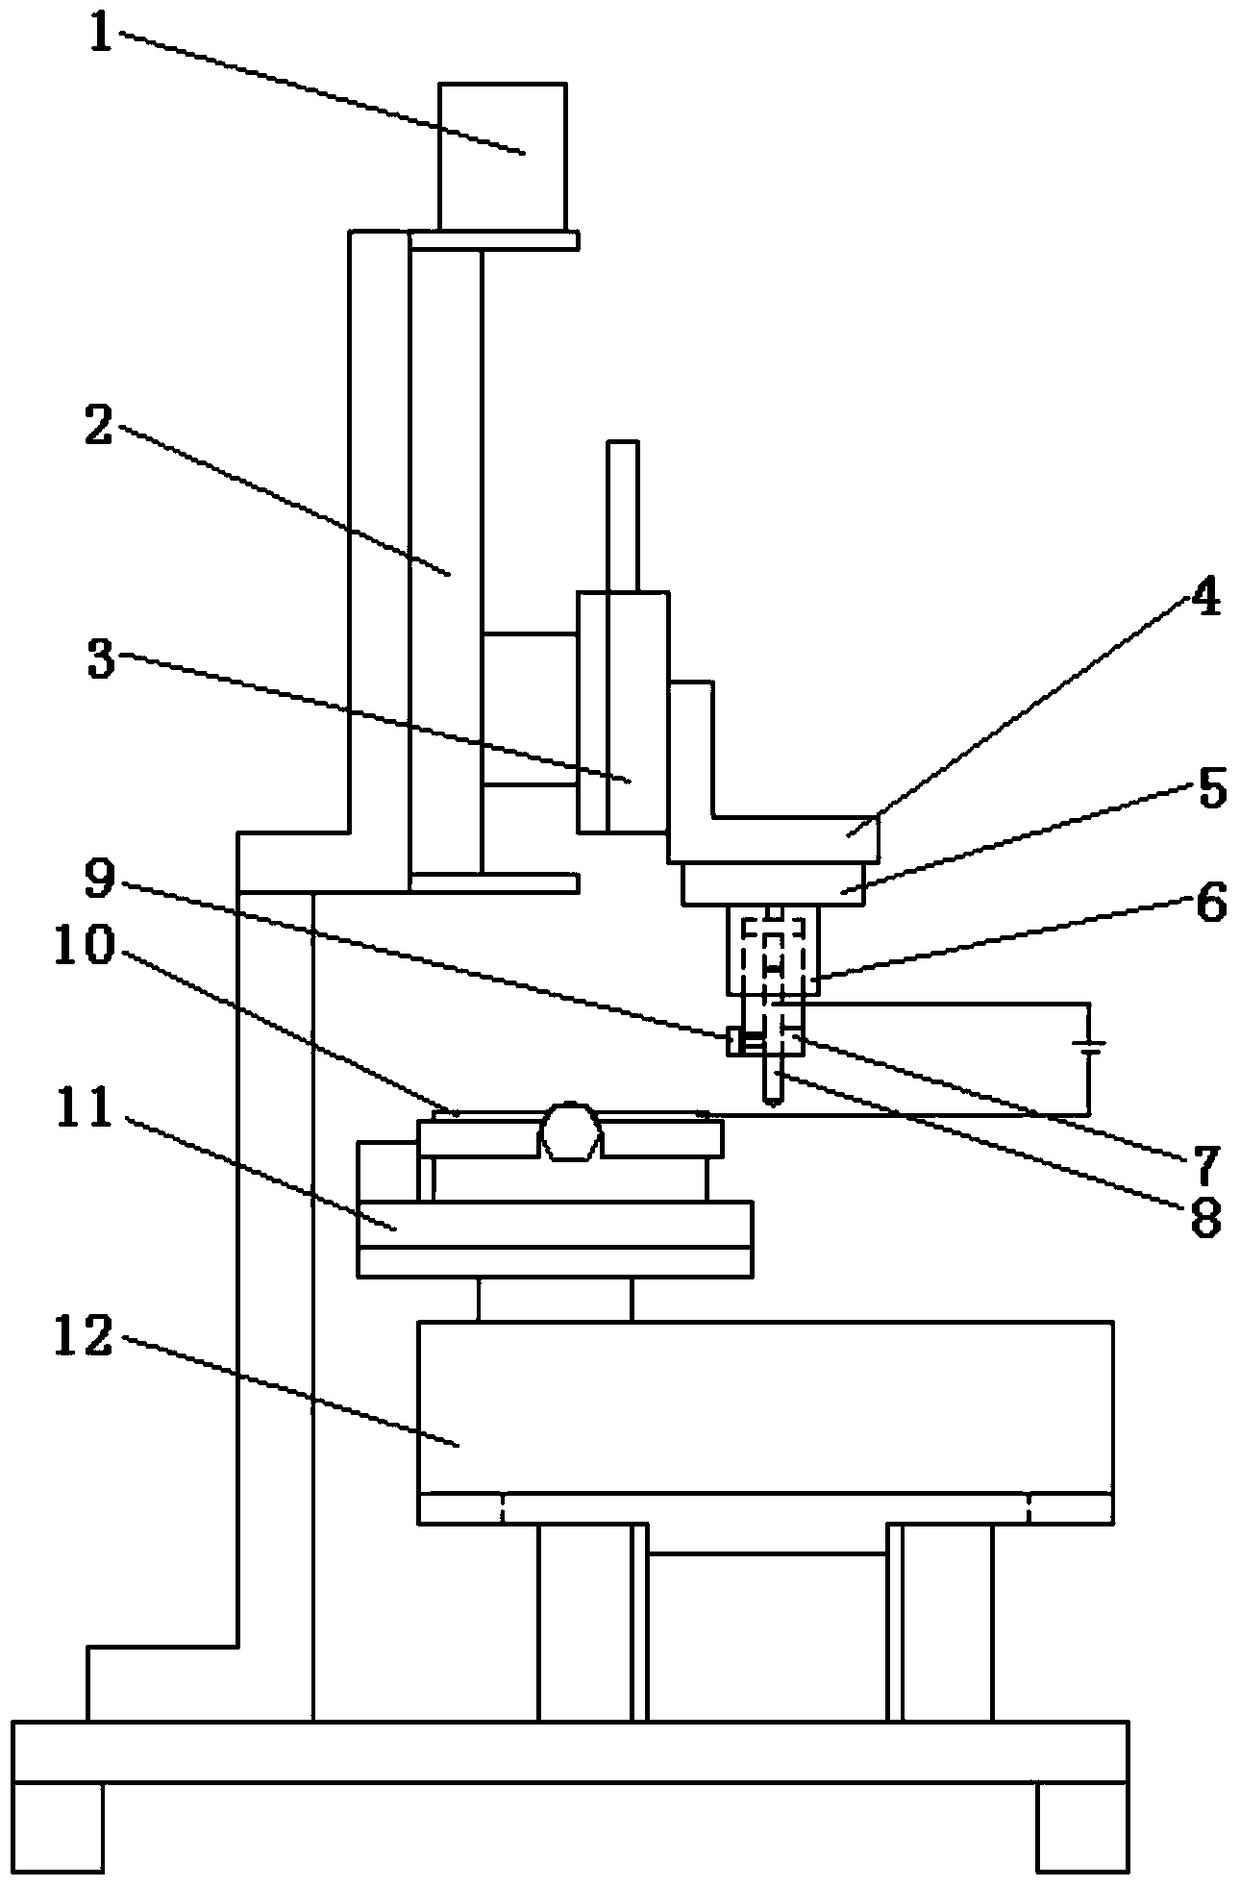 A current-carrying friction single contact peak arc testing machine